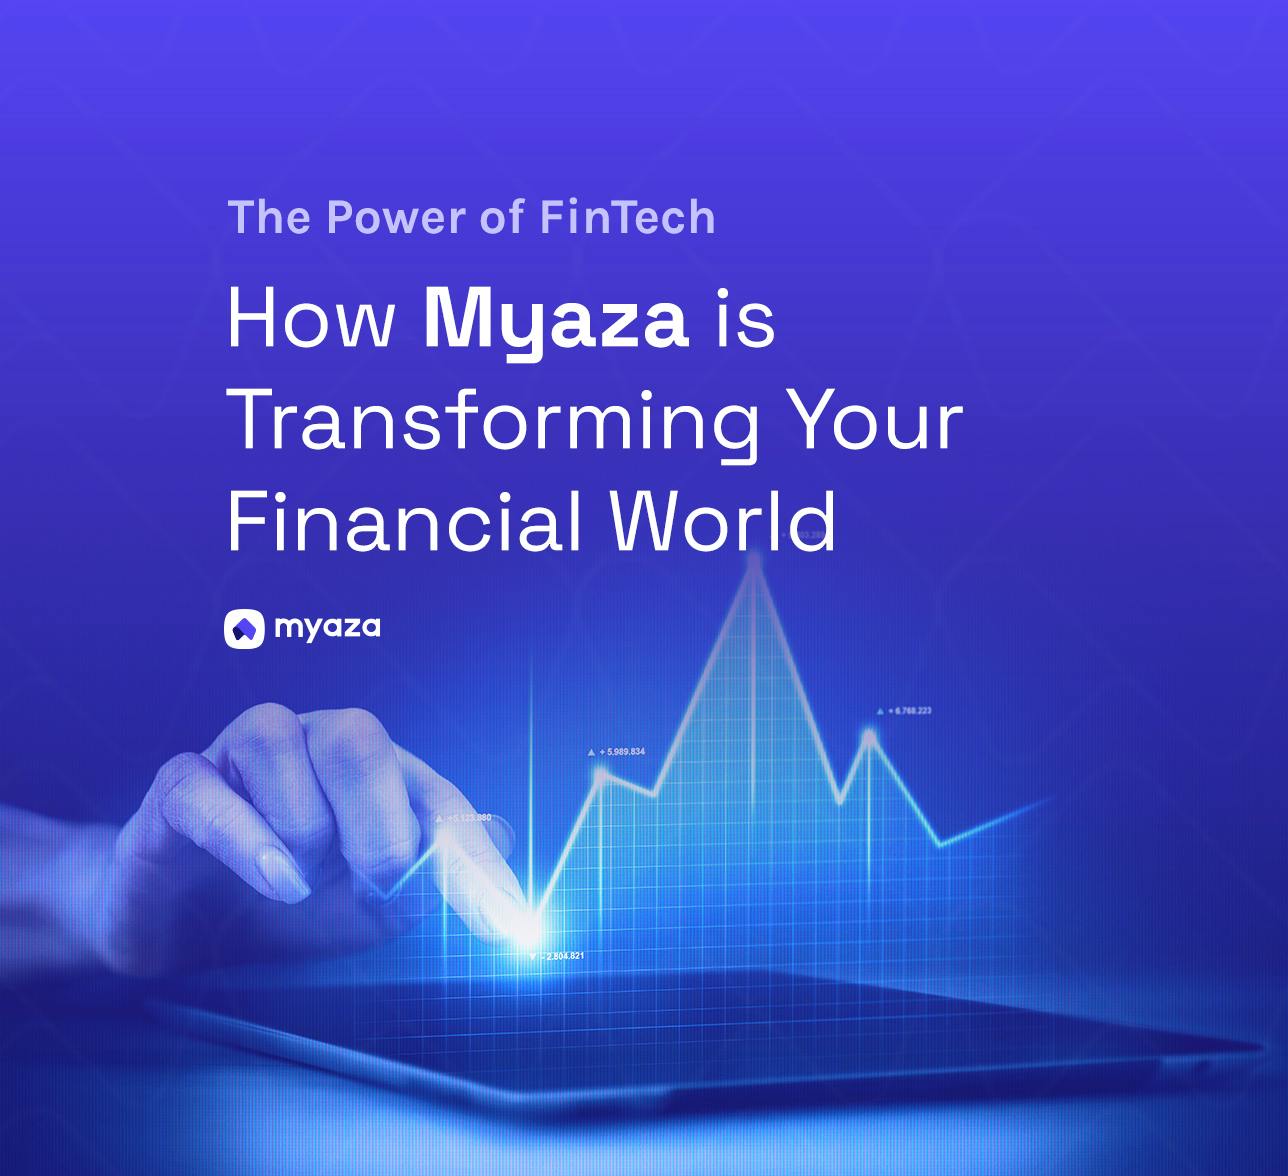 The Power of Fintech: How Myaza is Transforming Your Financial World